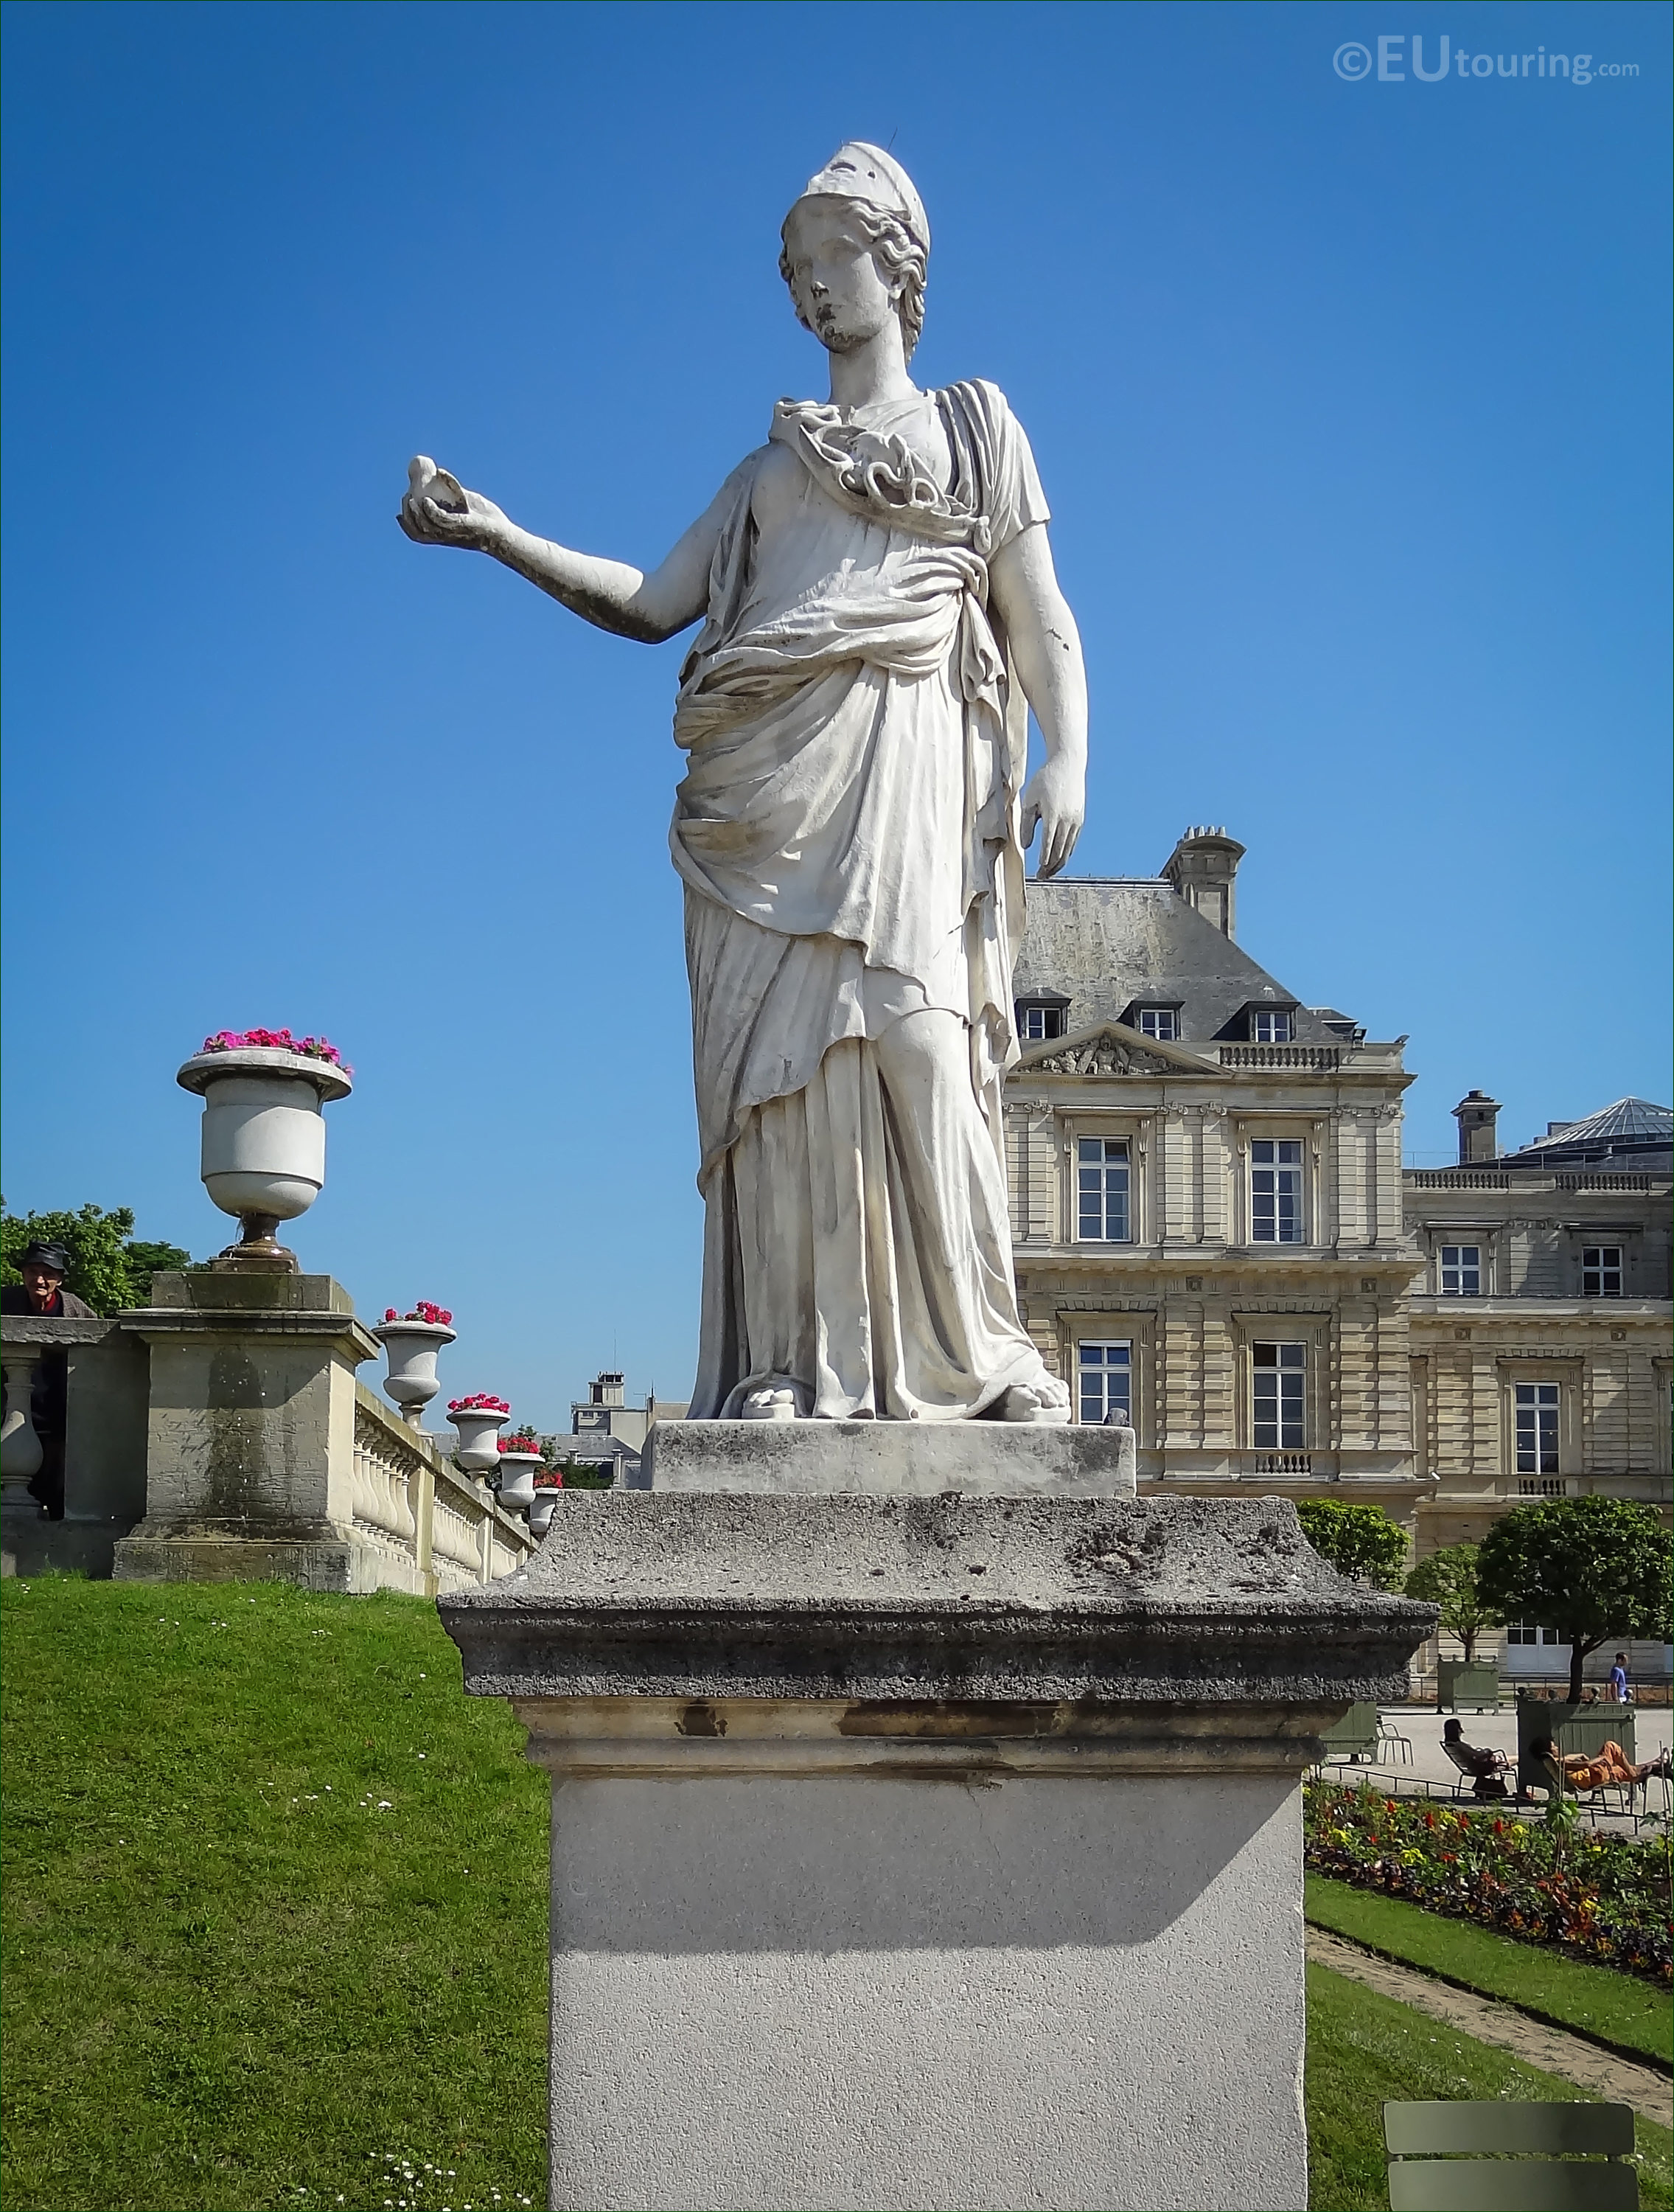 Minerva the Goddess of Wisdom statue in Luxembourg Gardens - Page 449
